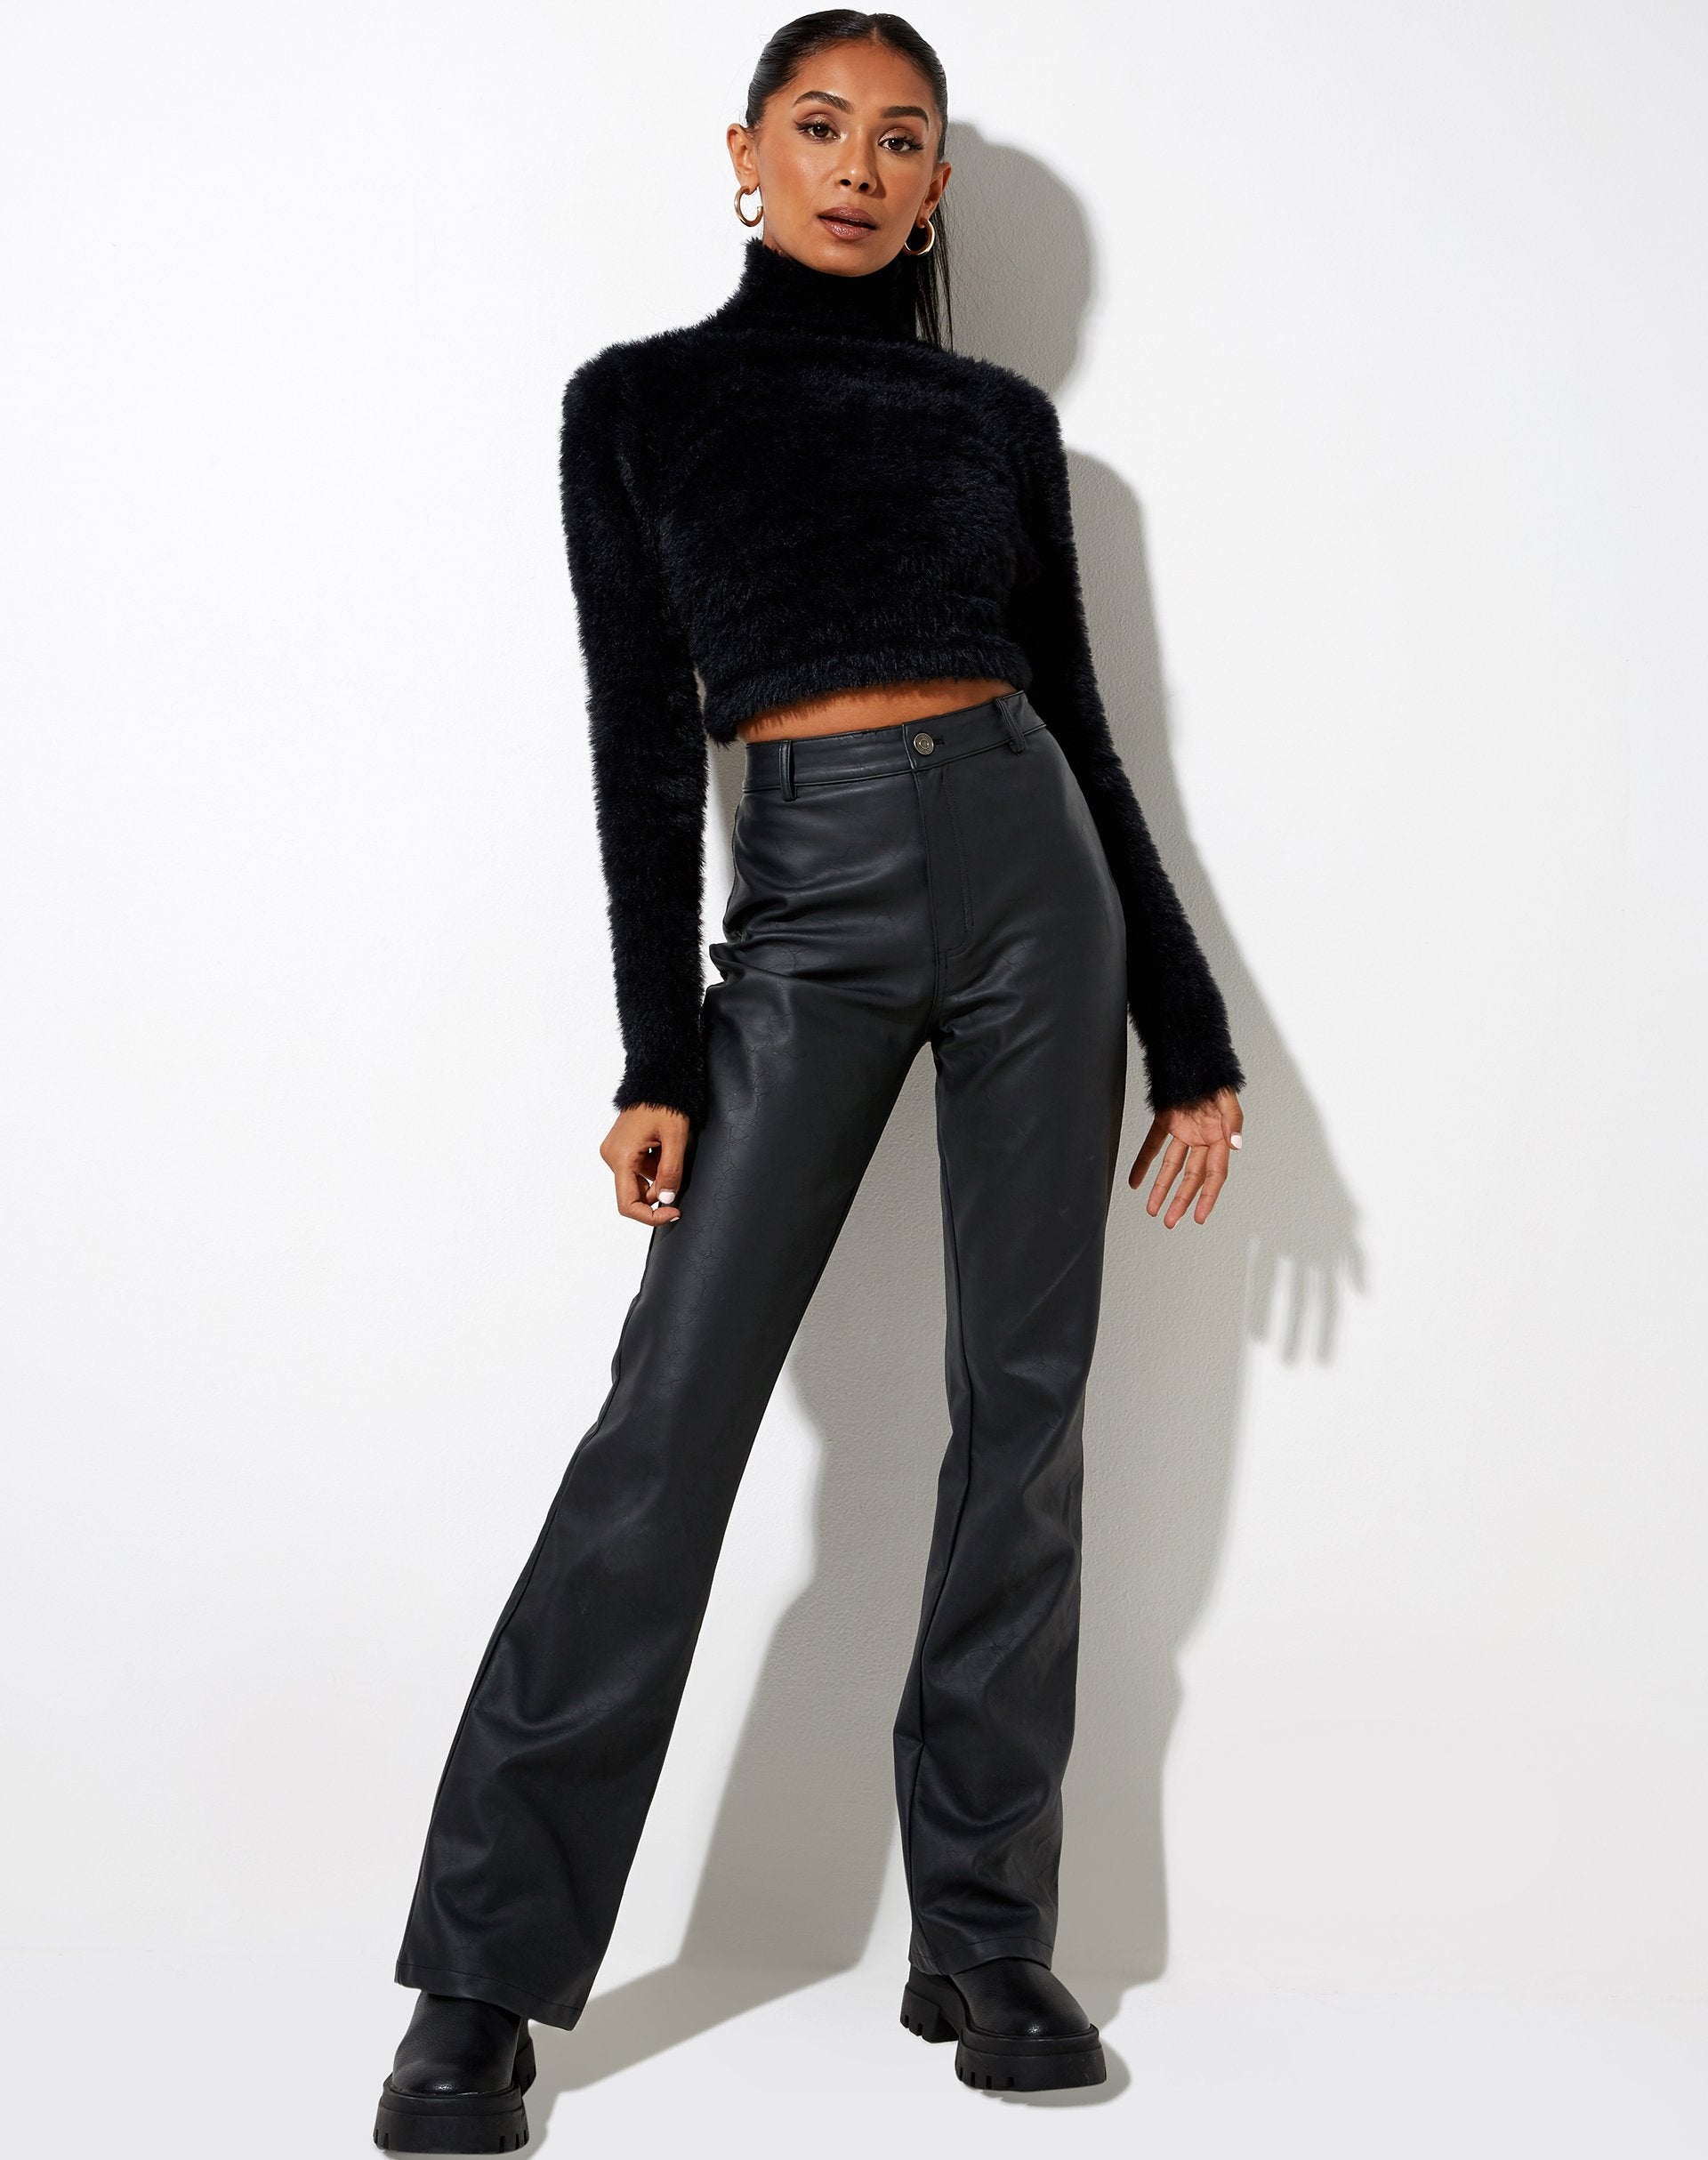 Image of Qolia Crop Top in Furry Knit Black